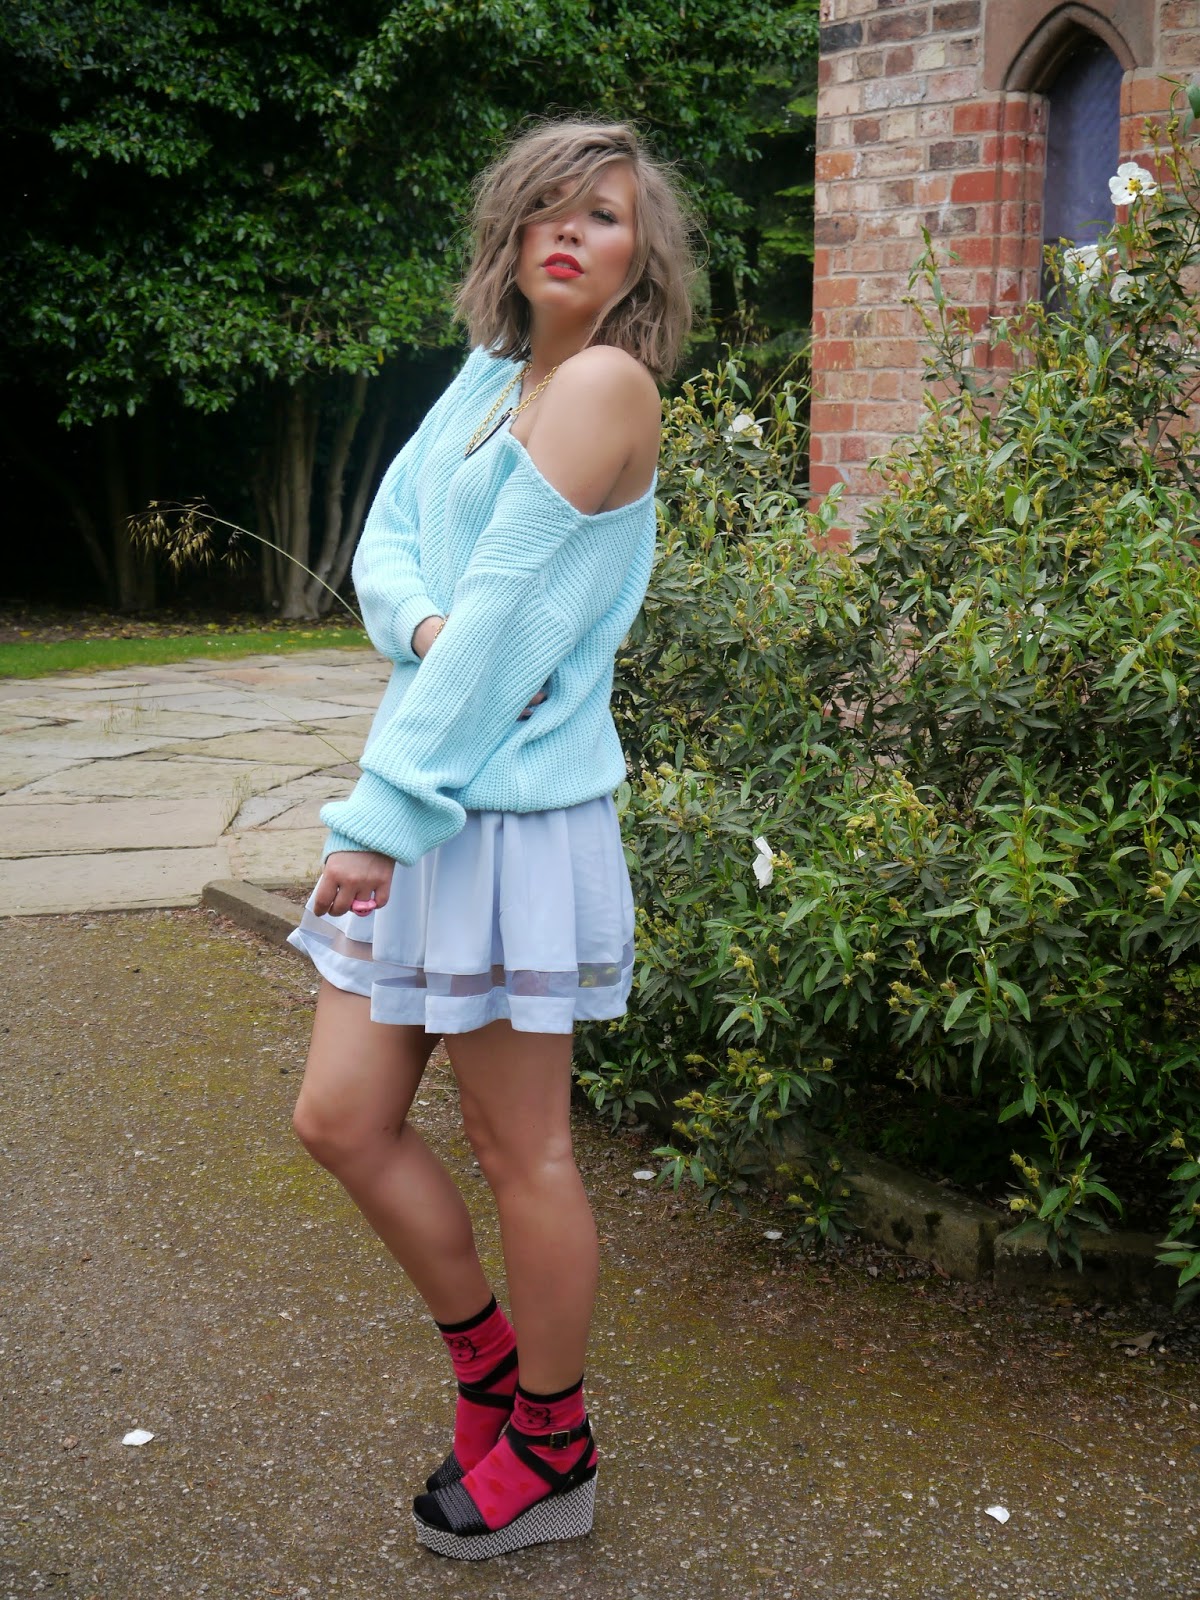 Perfect Summer Outfit With Hello Kitty Socks from Pretty Polly New Range